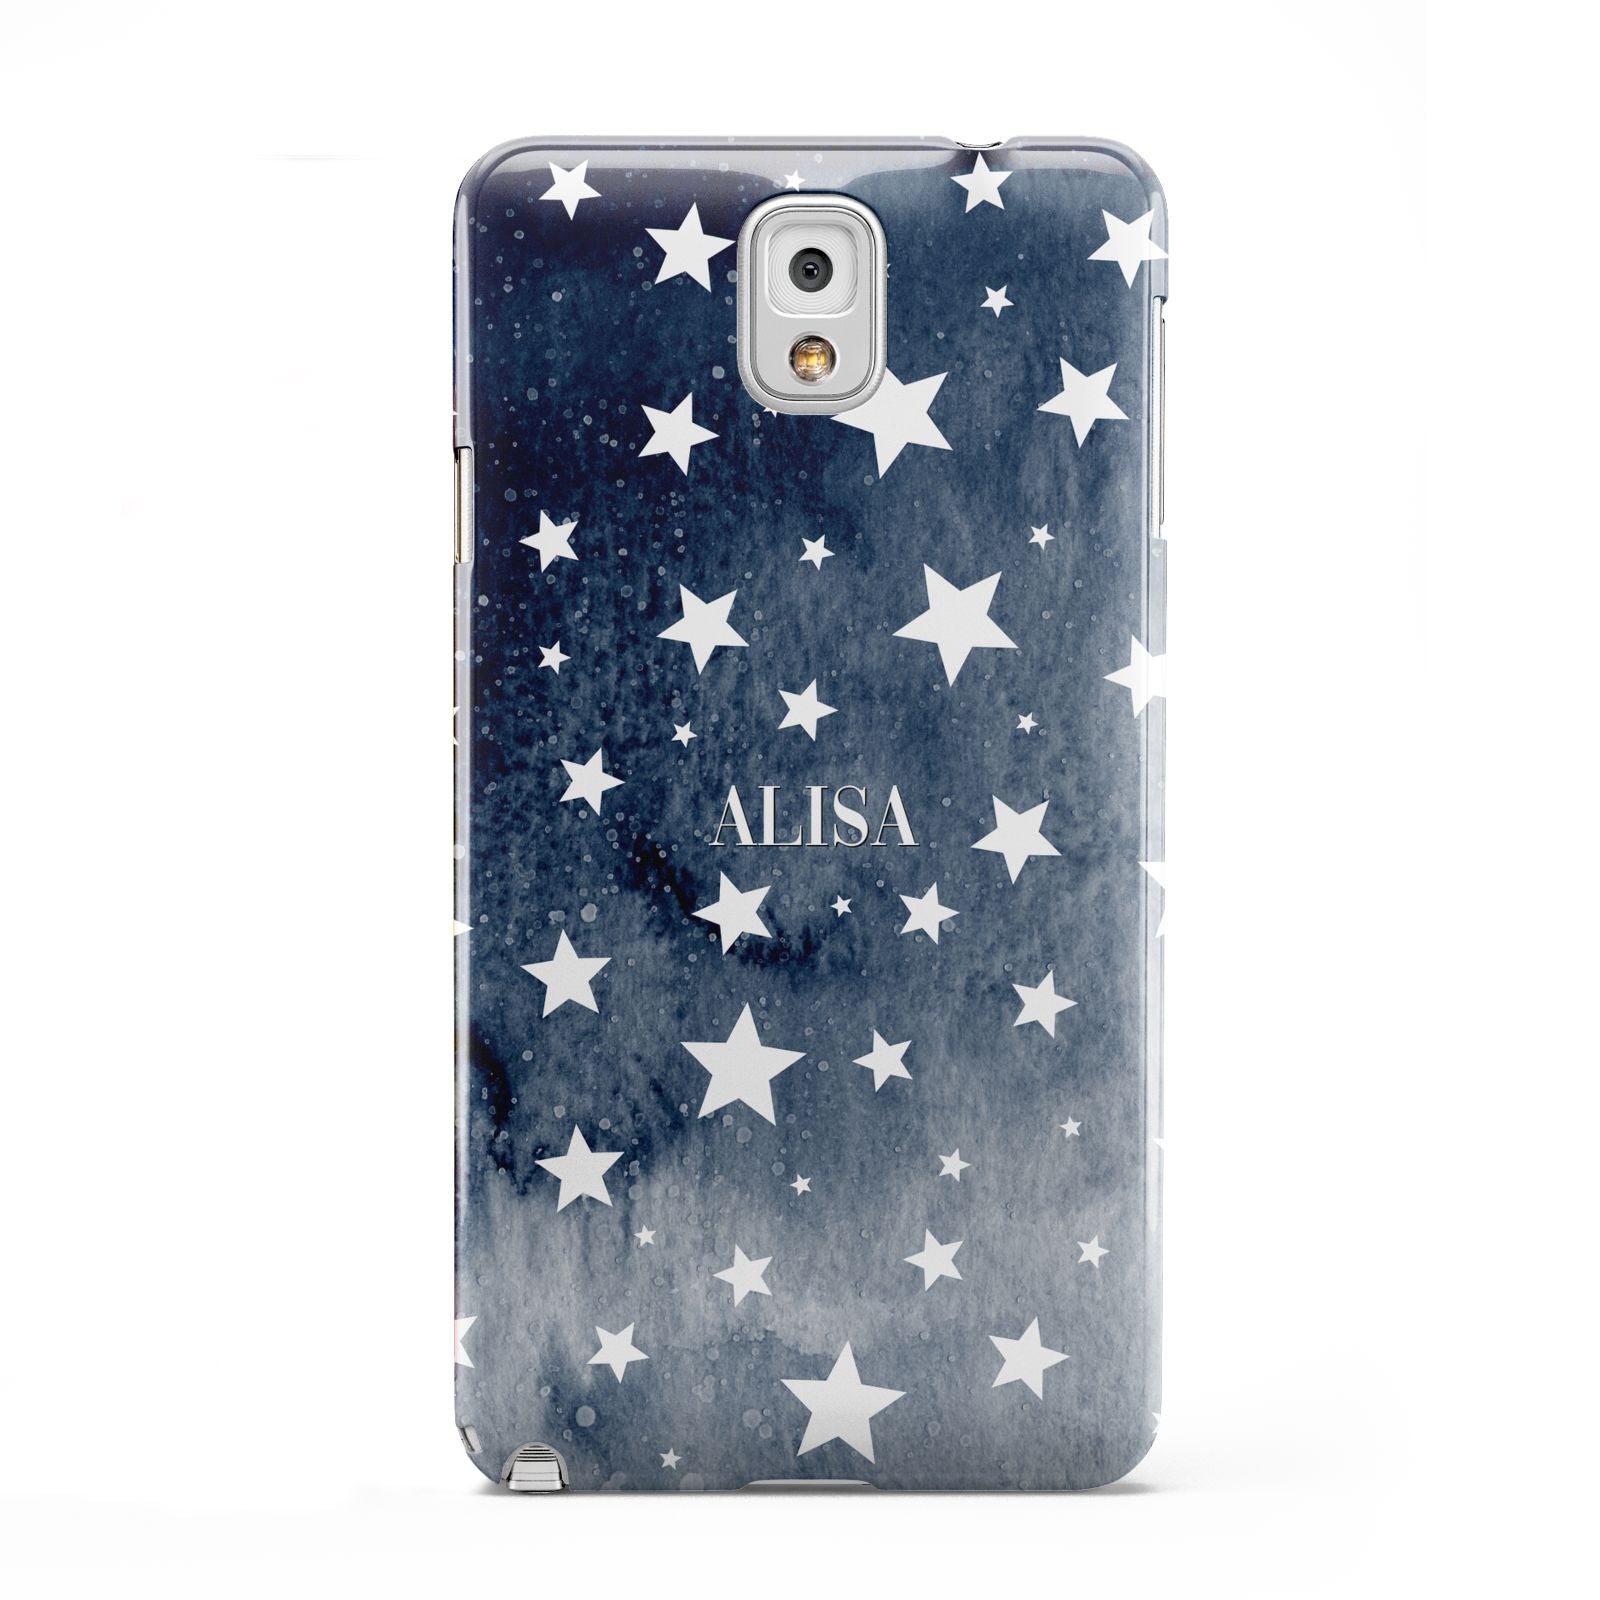 Personalised Star Print Samsung Galaxy Note 3 Case